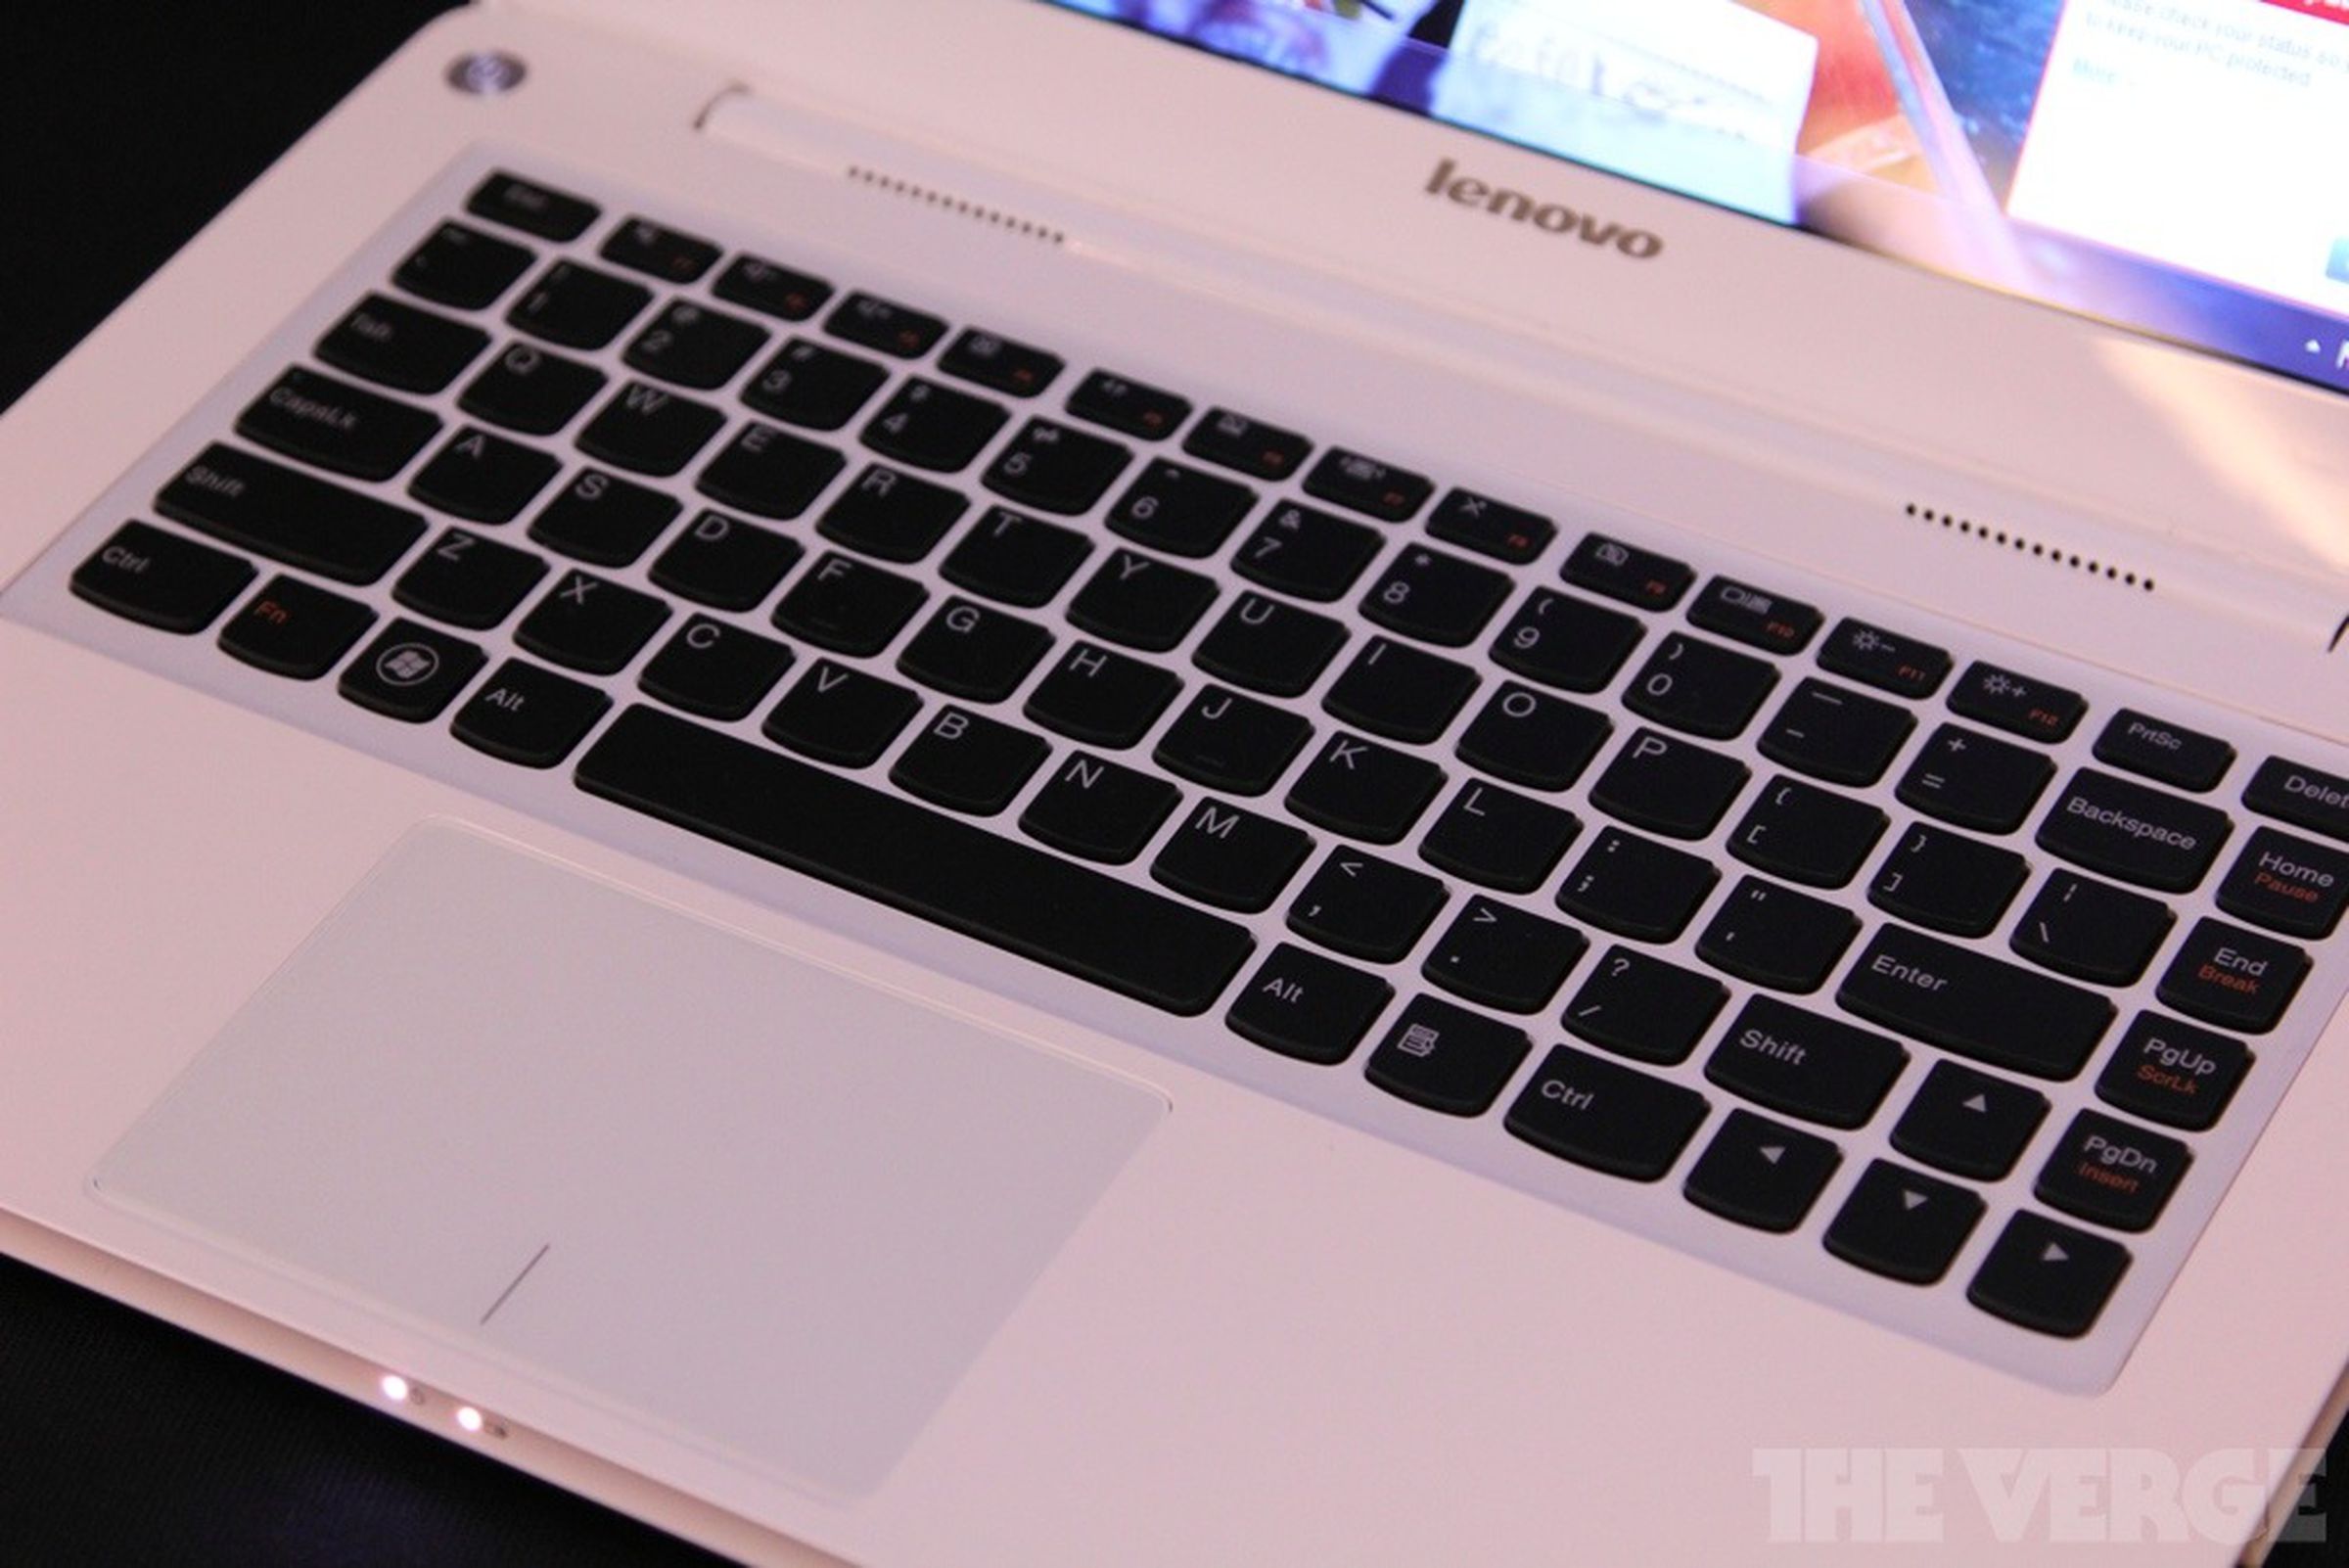 Lenovo IdeaPad U310, U410, Y480 and Z580 hands-on pictures